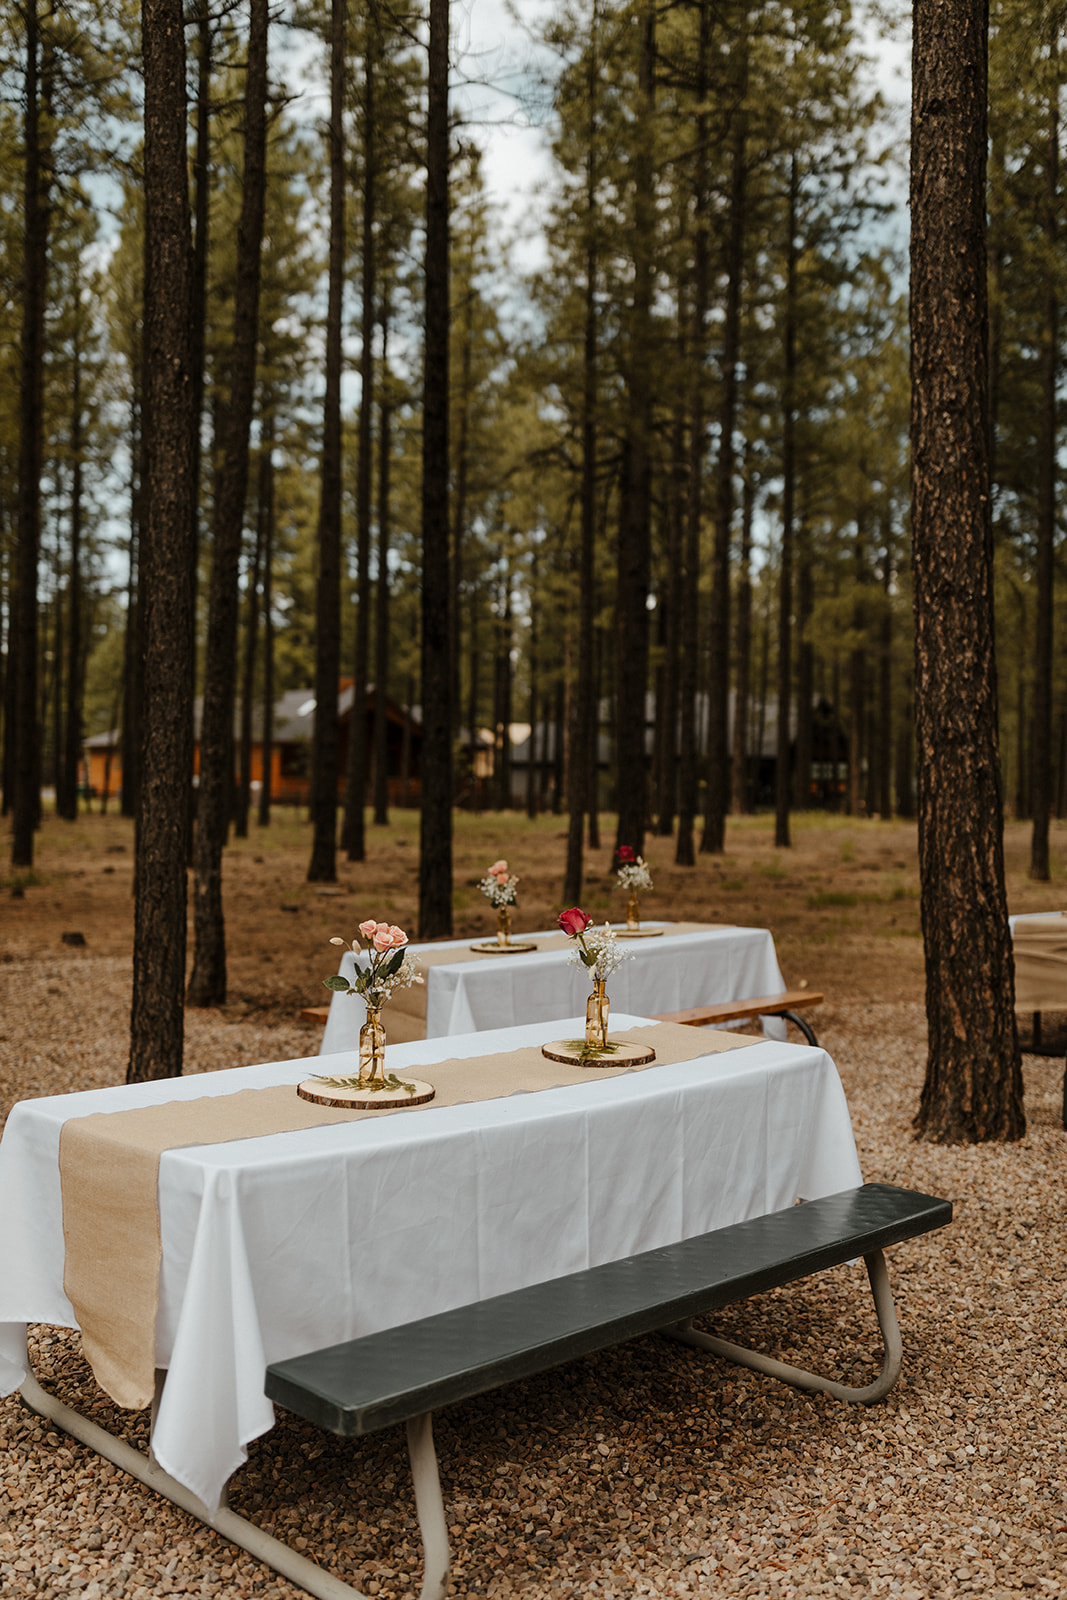 reception tables in the woods at one of Arizona's forest wedding venues